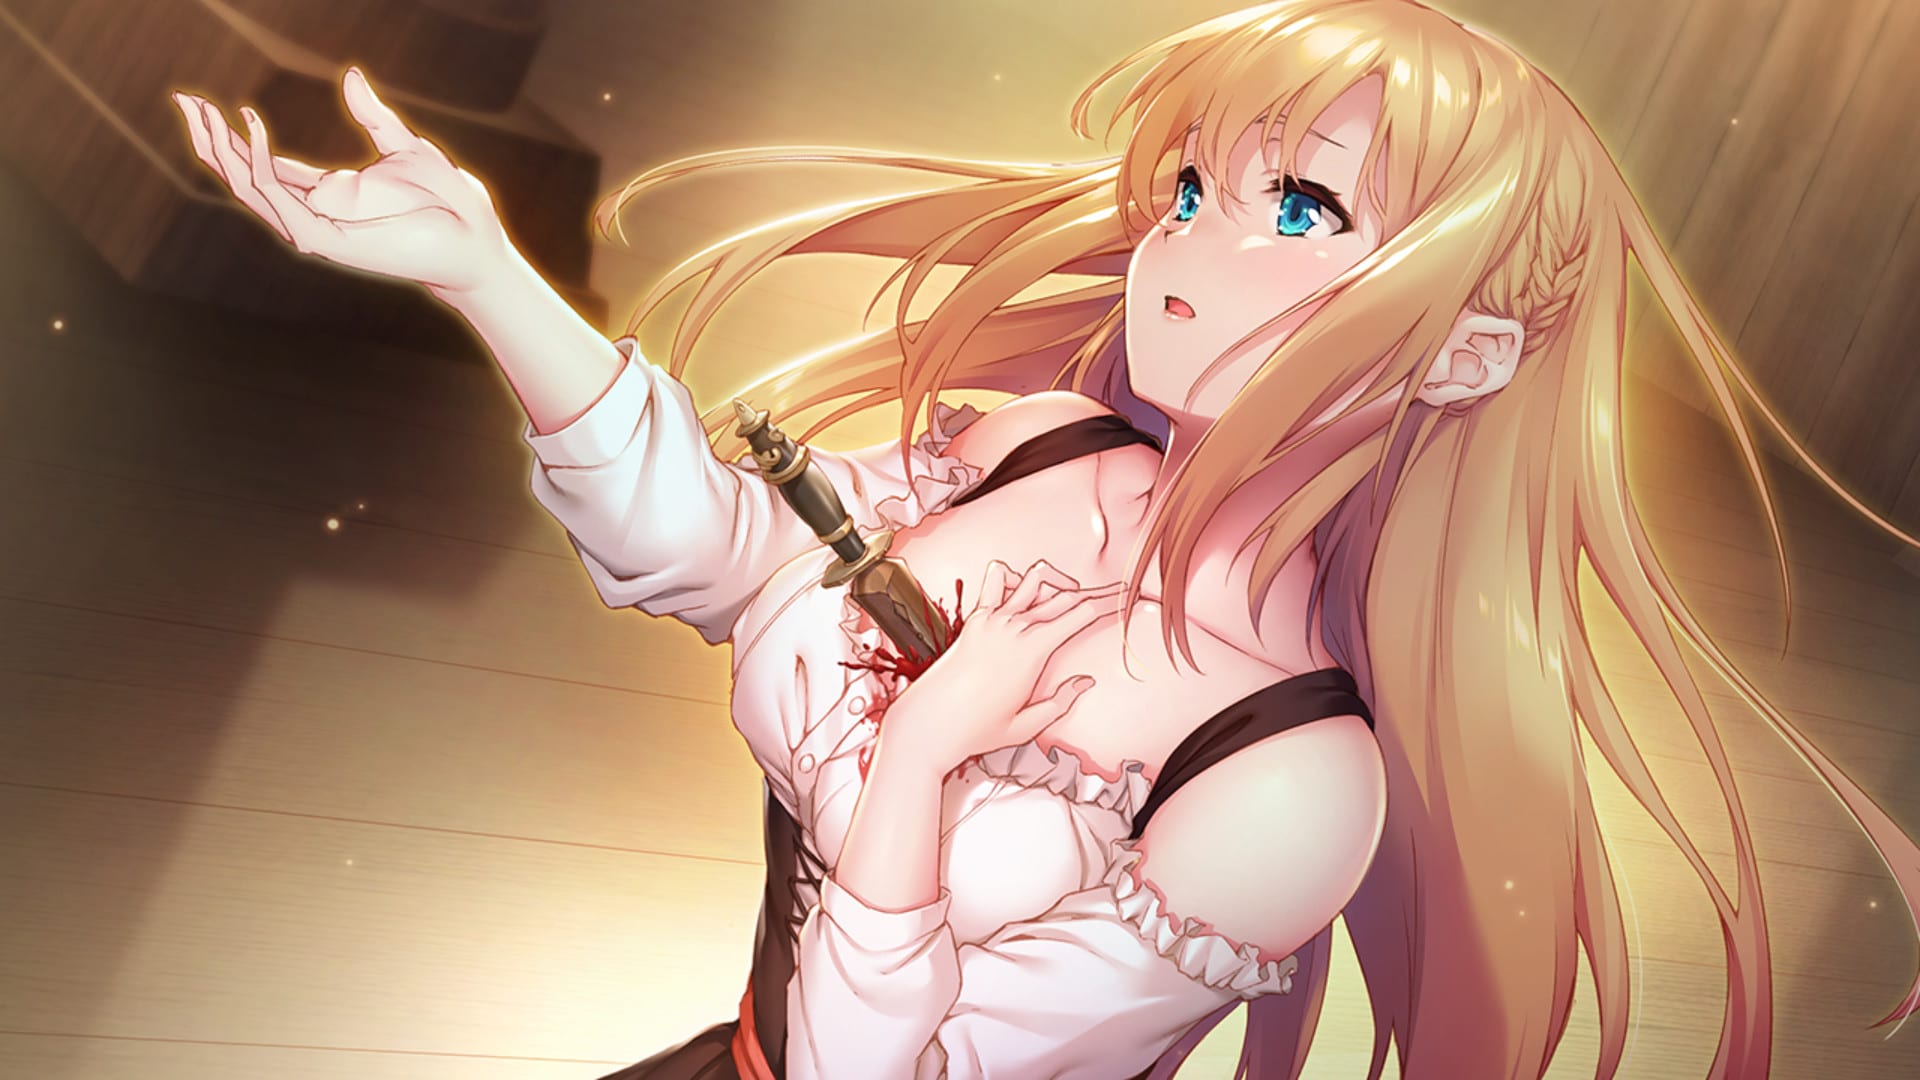 Horror Visual Novel ‘Salthe’ Gets Western Release Date on PC